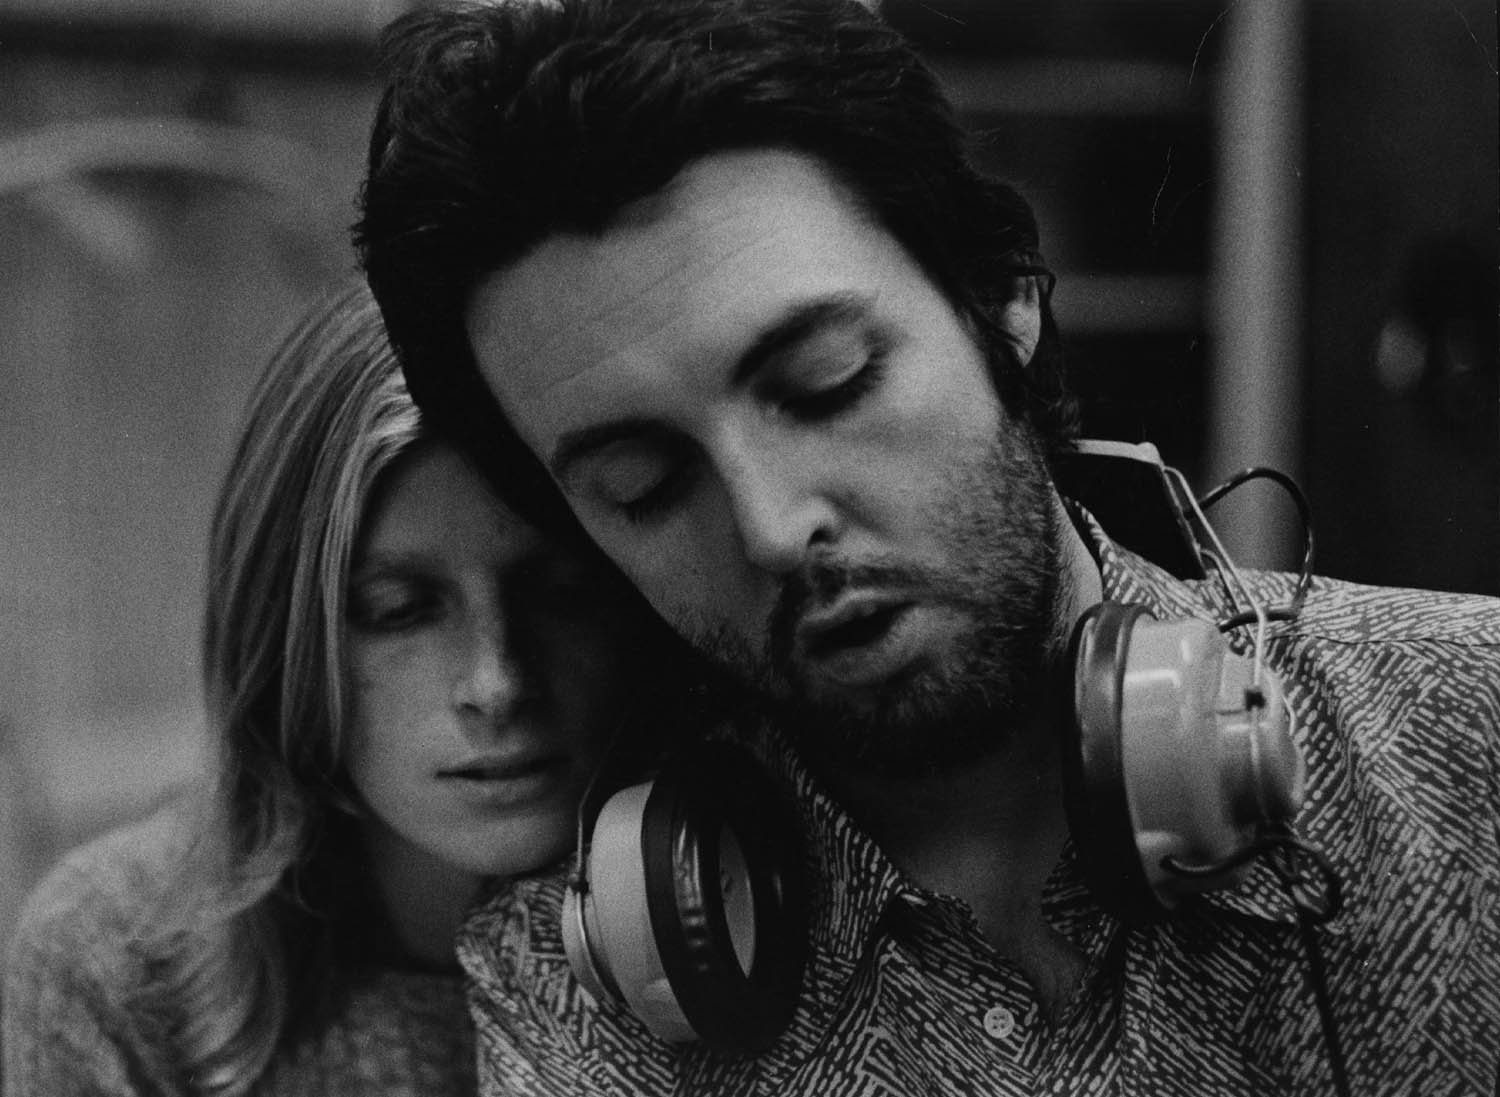 Ex-Beatle Paul McCartney and his wife Linda in a New York recording studio putting finishing touches to Paul's single 'Another Day' and 'Oh Woman, Oh Why?'. 1971.